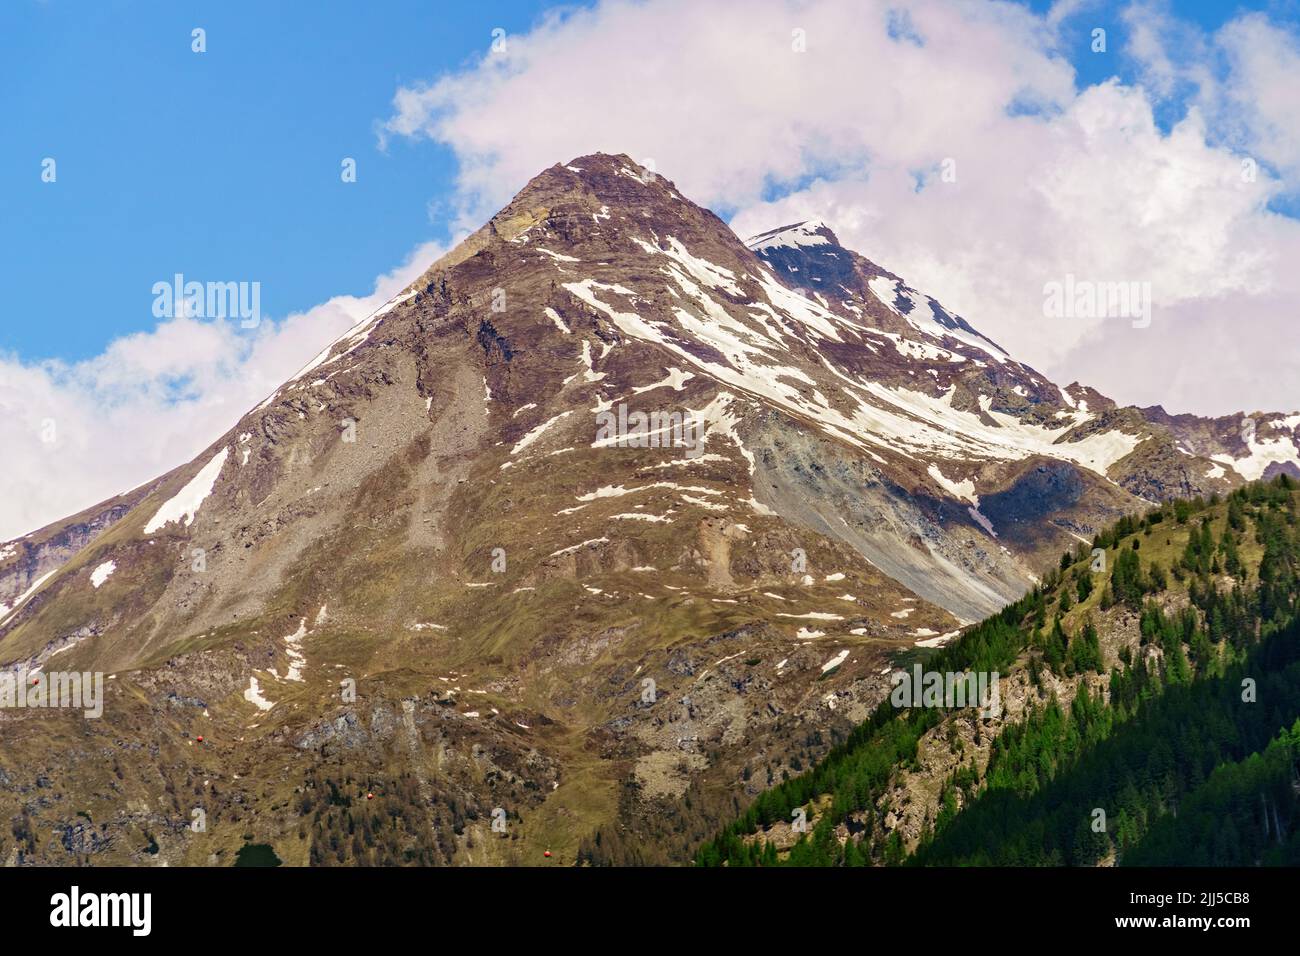 High mountain in the alps, Austria, partly covered with snow, with a rockfall. Stock Photo